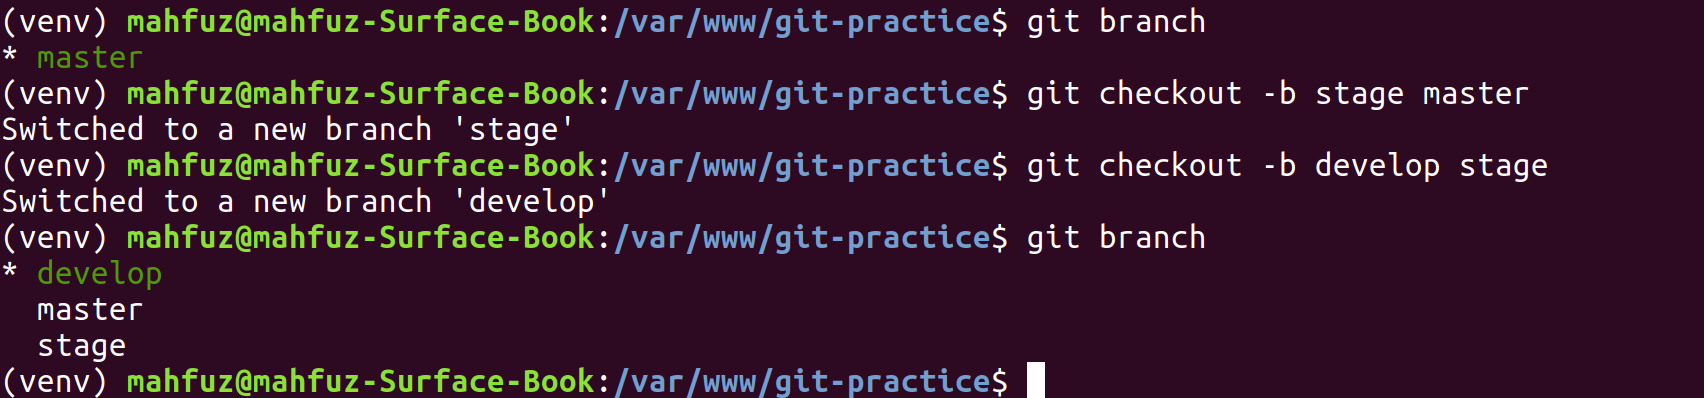 GIT New Branches